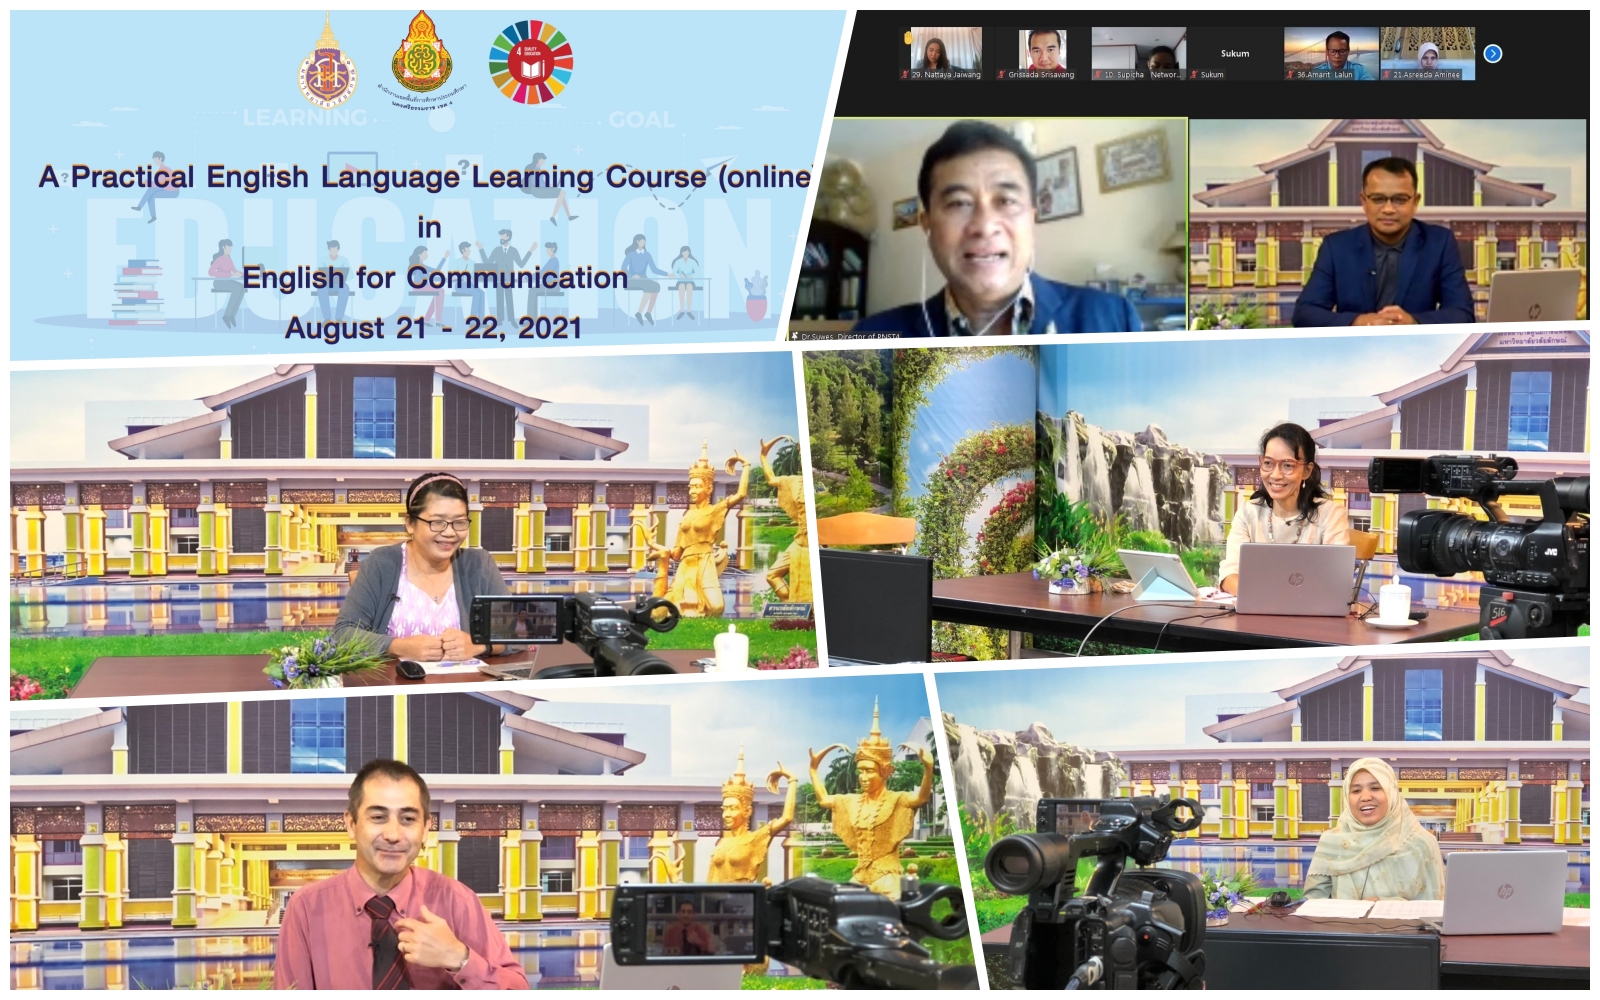 The Center for Academic Service, Walailak University organized “A Practical English Language Learning Course for Communication” through online learning to the NPP, District 4